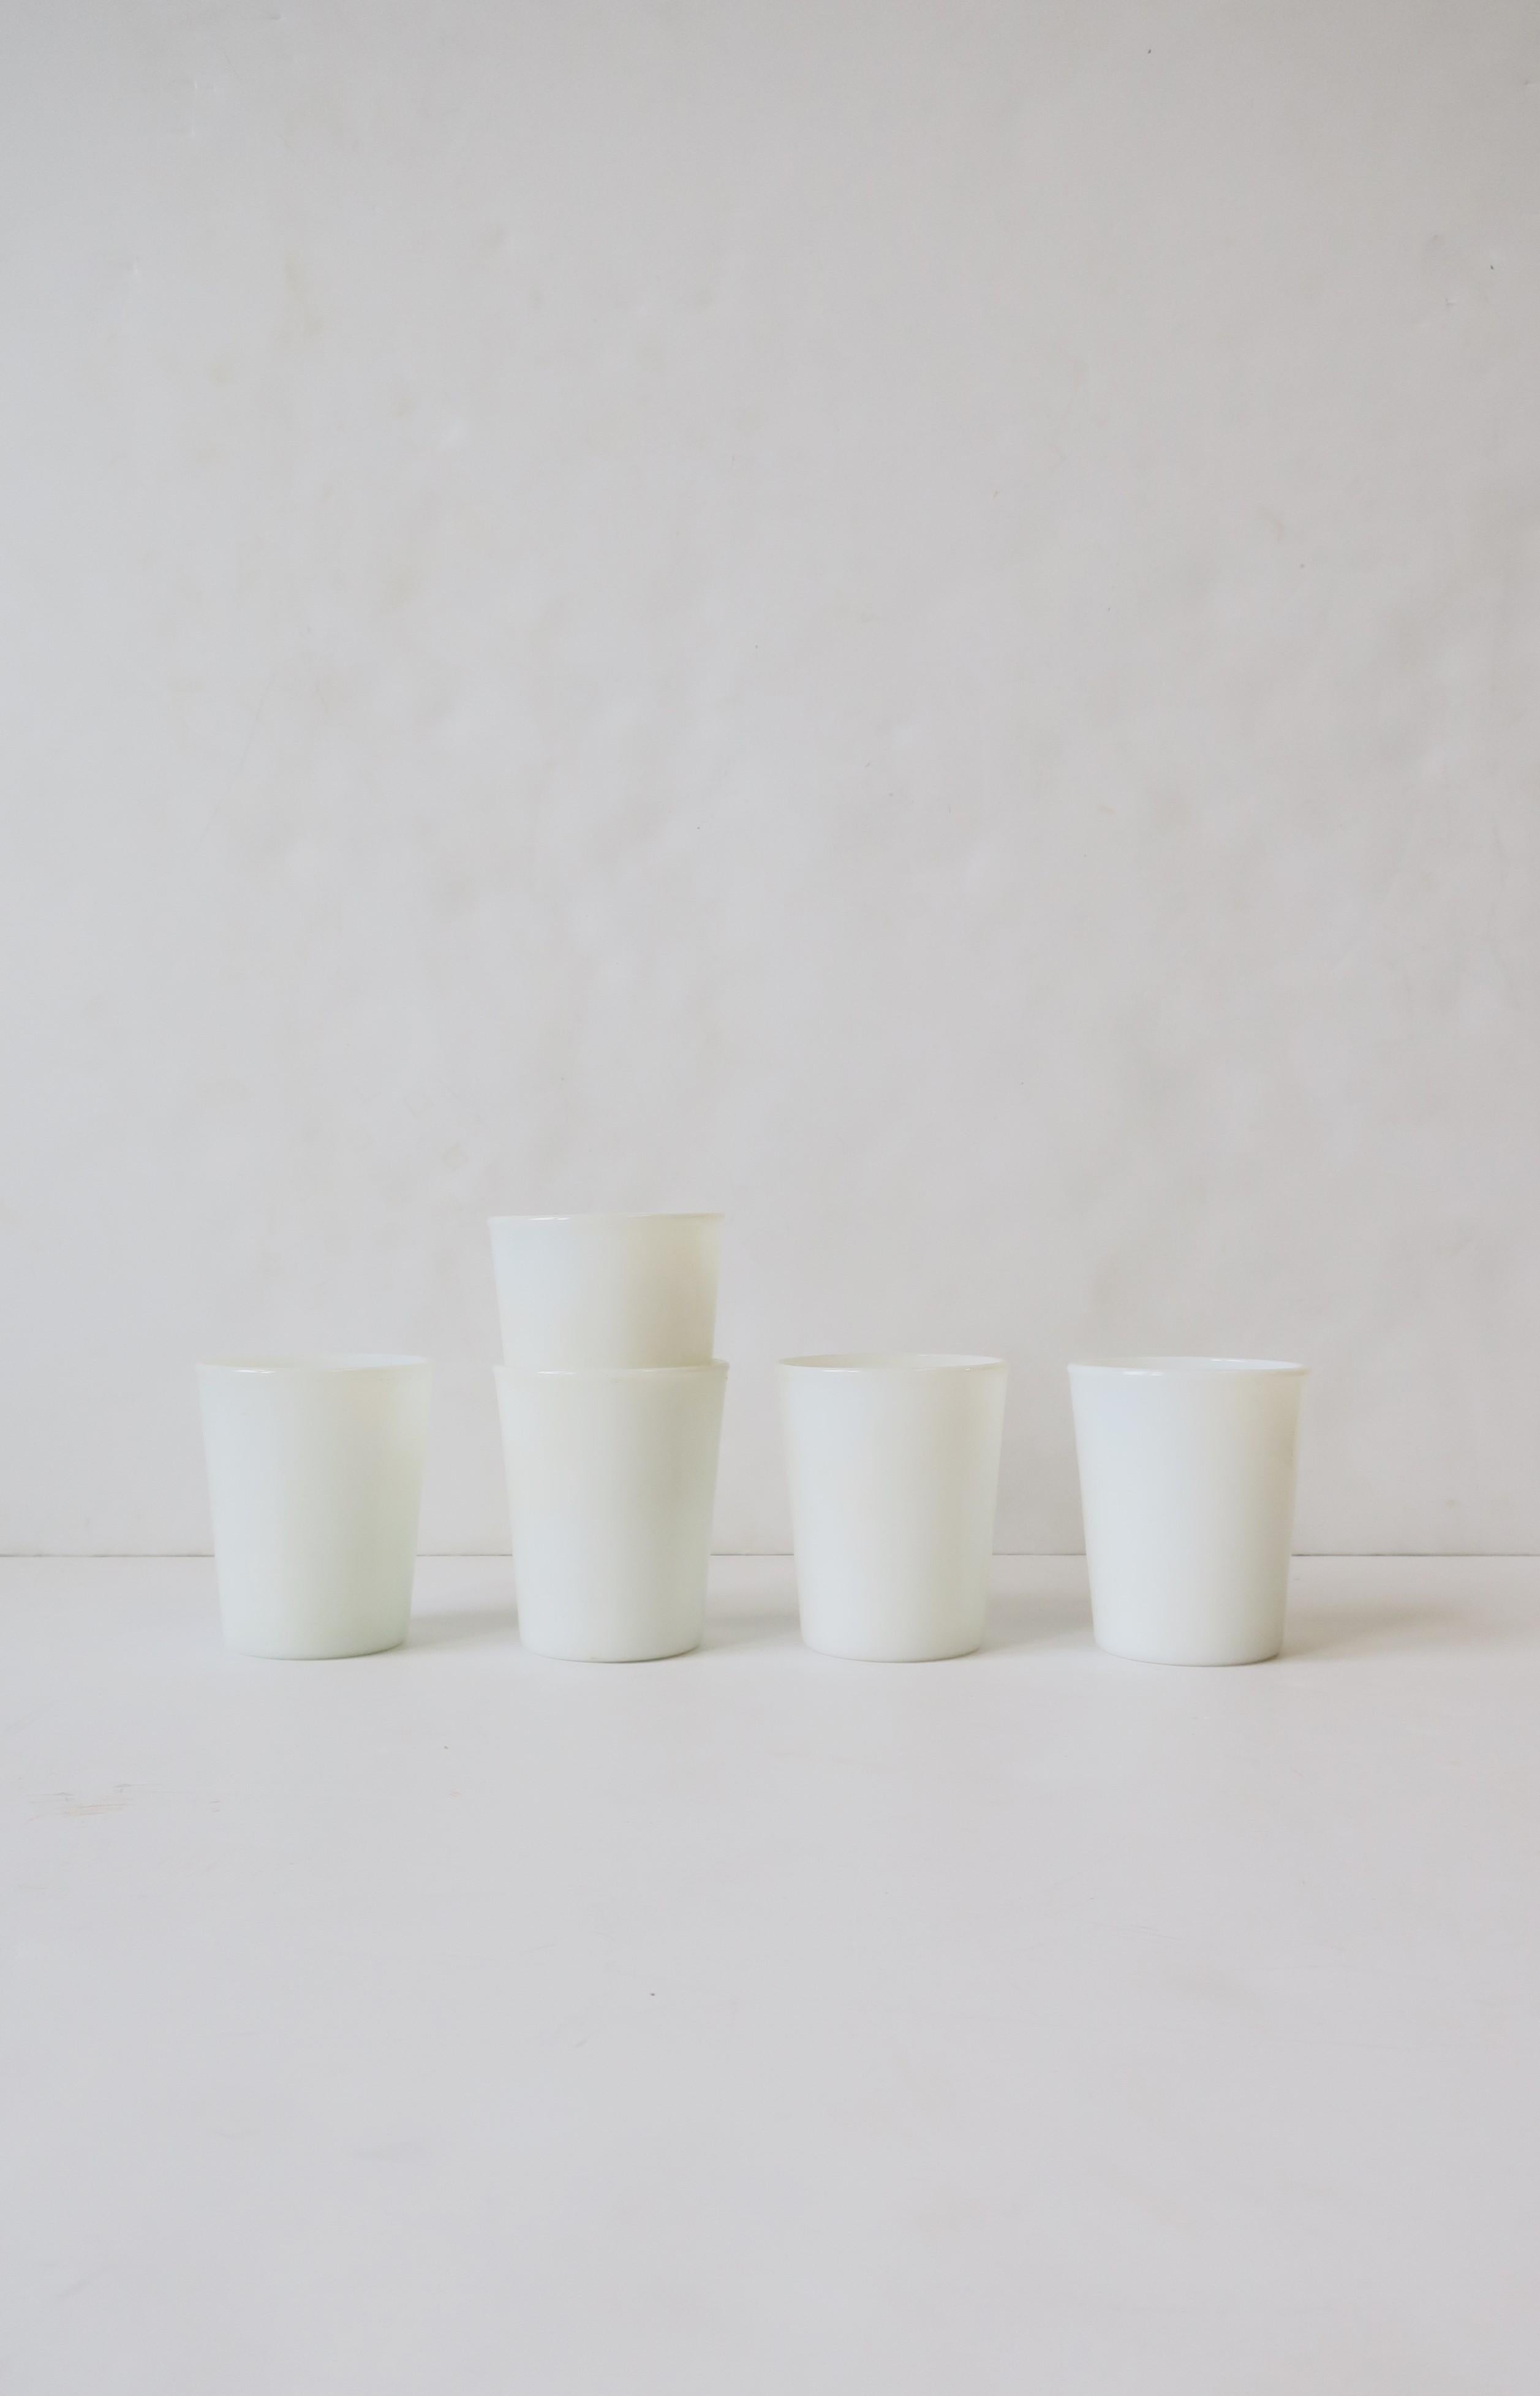 White Milk Glass Cocktail Tumbler Glasses, Set of 5, Early 20th Century 5